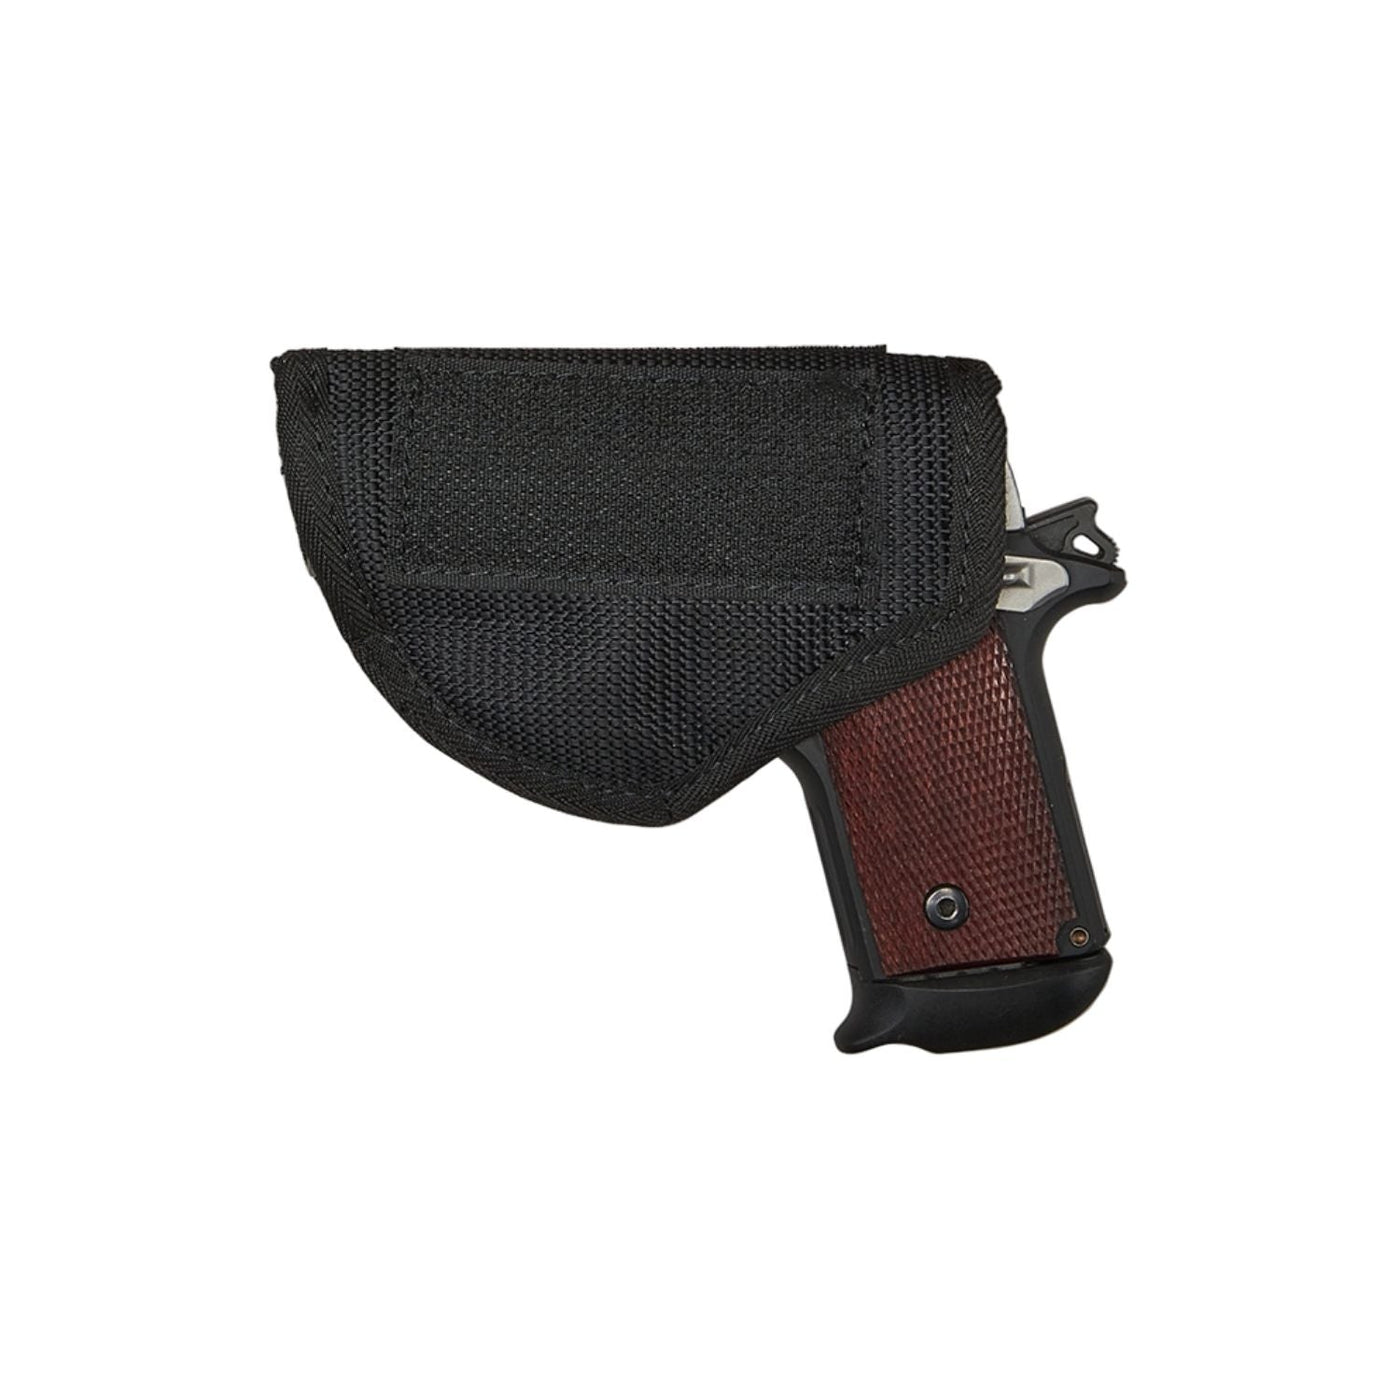 Concealed Carry Holsters -  Lady Conceal -  Velcro Holster -  Universal Holster sizes -  revolver gun cover -  solo hunter gun cover -  elastic gun cover -  gun cover for pistol 